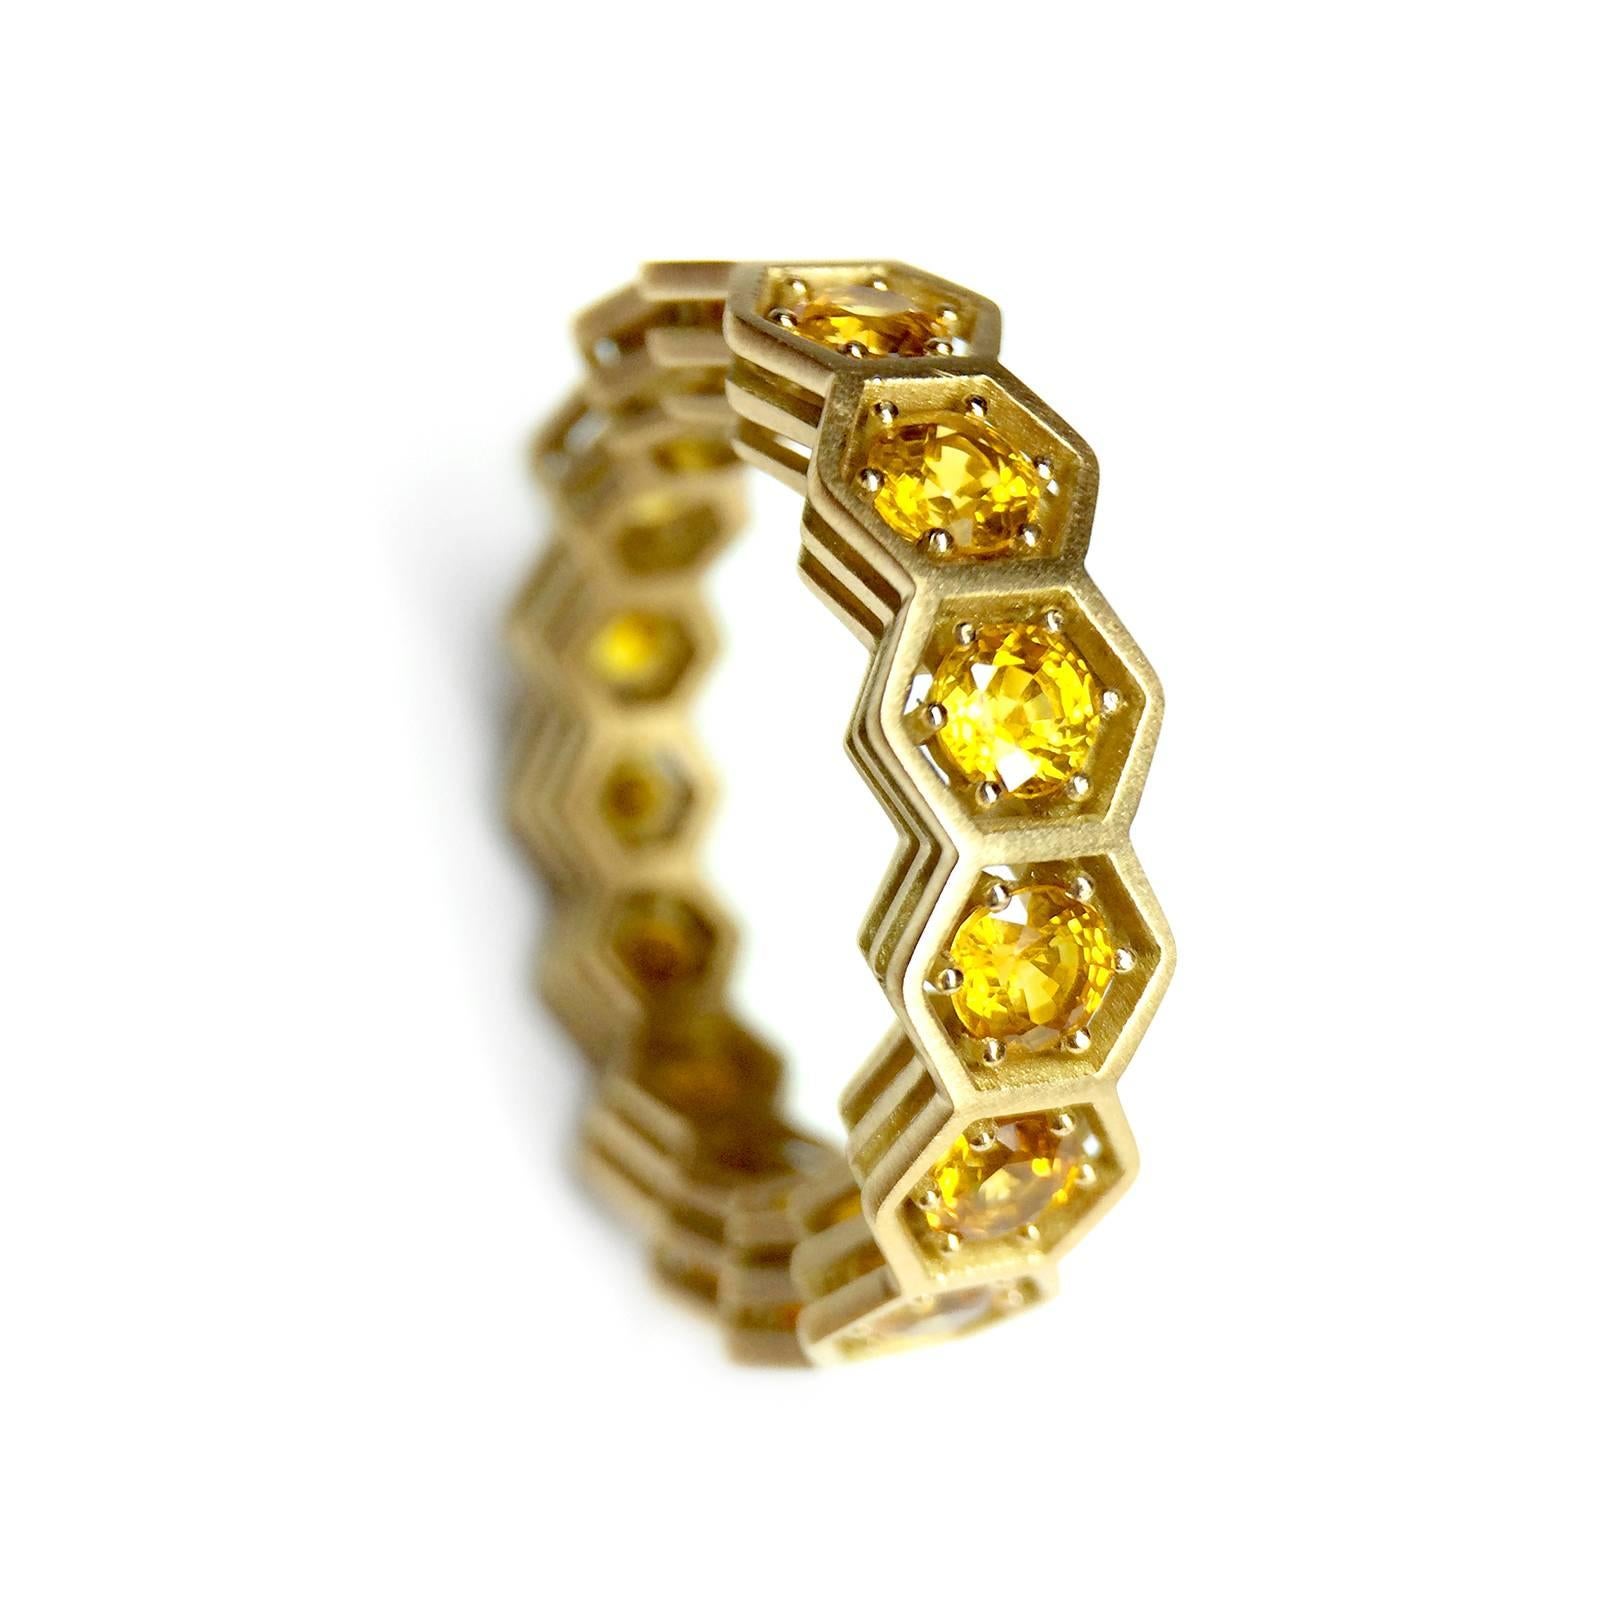 From the Wired Collection, an eternity ring in 18k yellow gold with yellow sapphires (3.69 cts). Hexagon top view with distinctive 